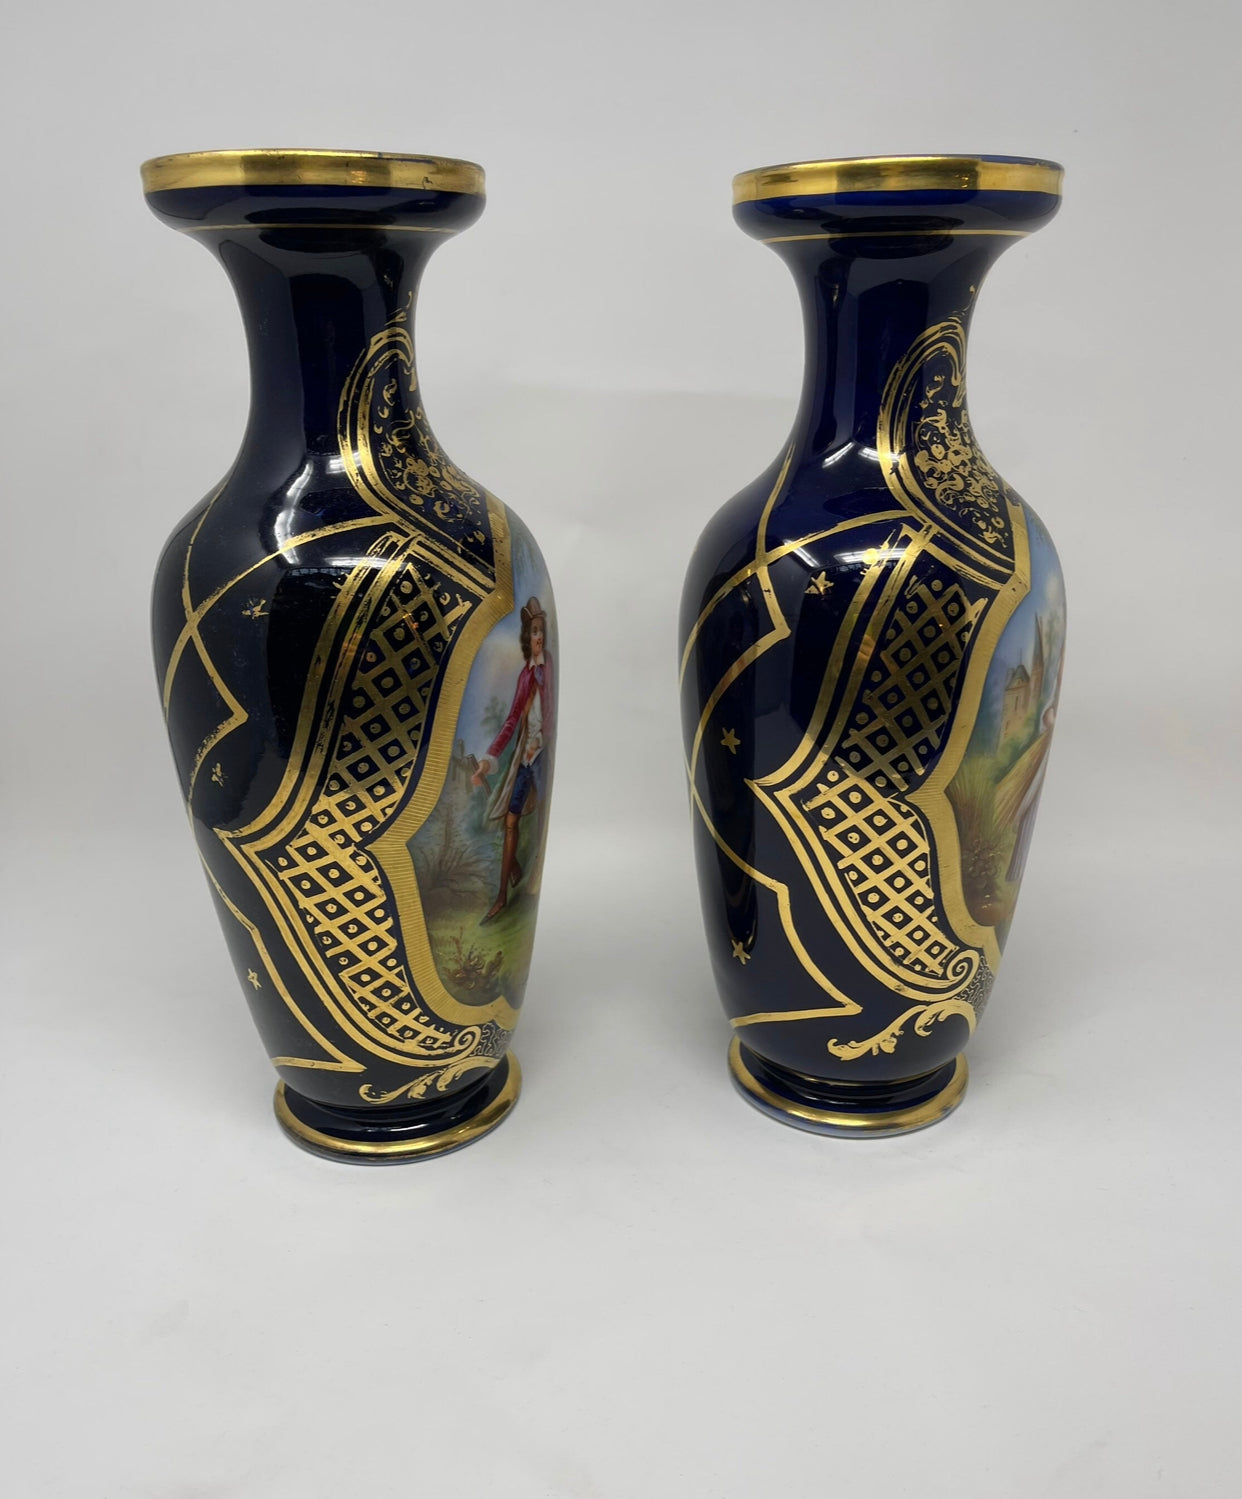 Antique French Old Paris Gilded Porcelain Vases with Hand Painted Courting Scenes - Pair